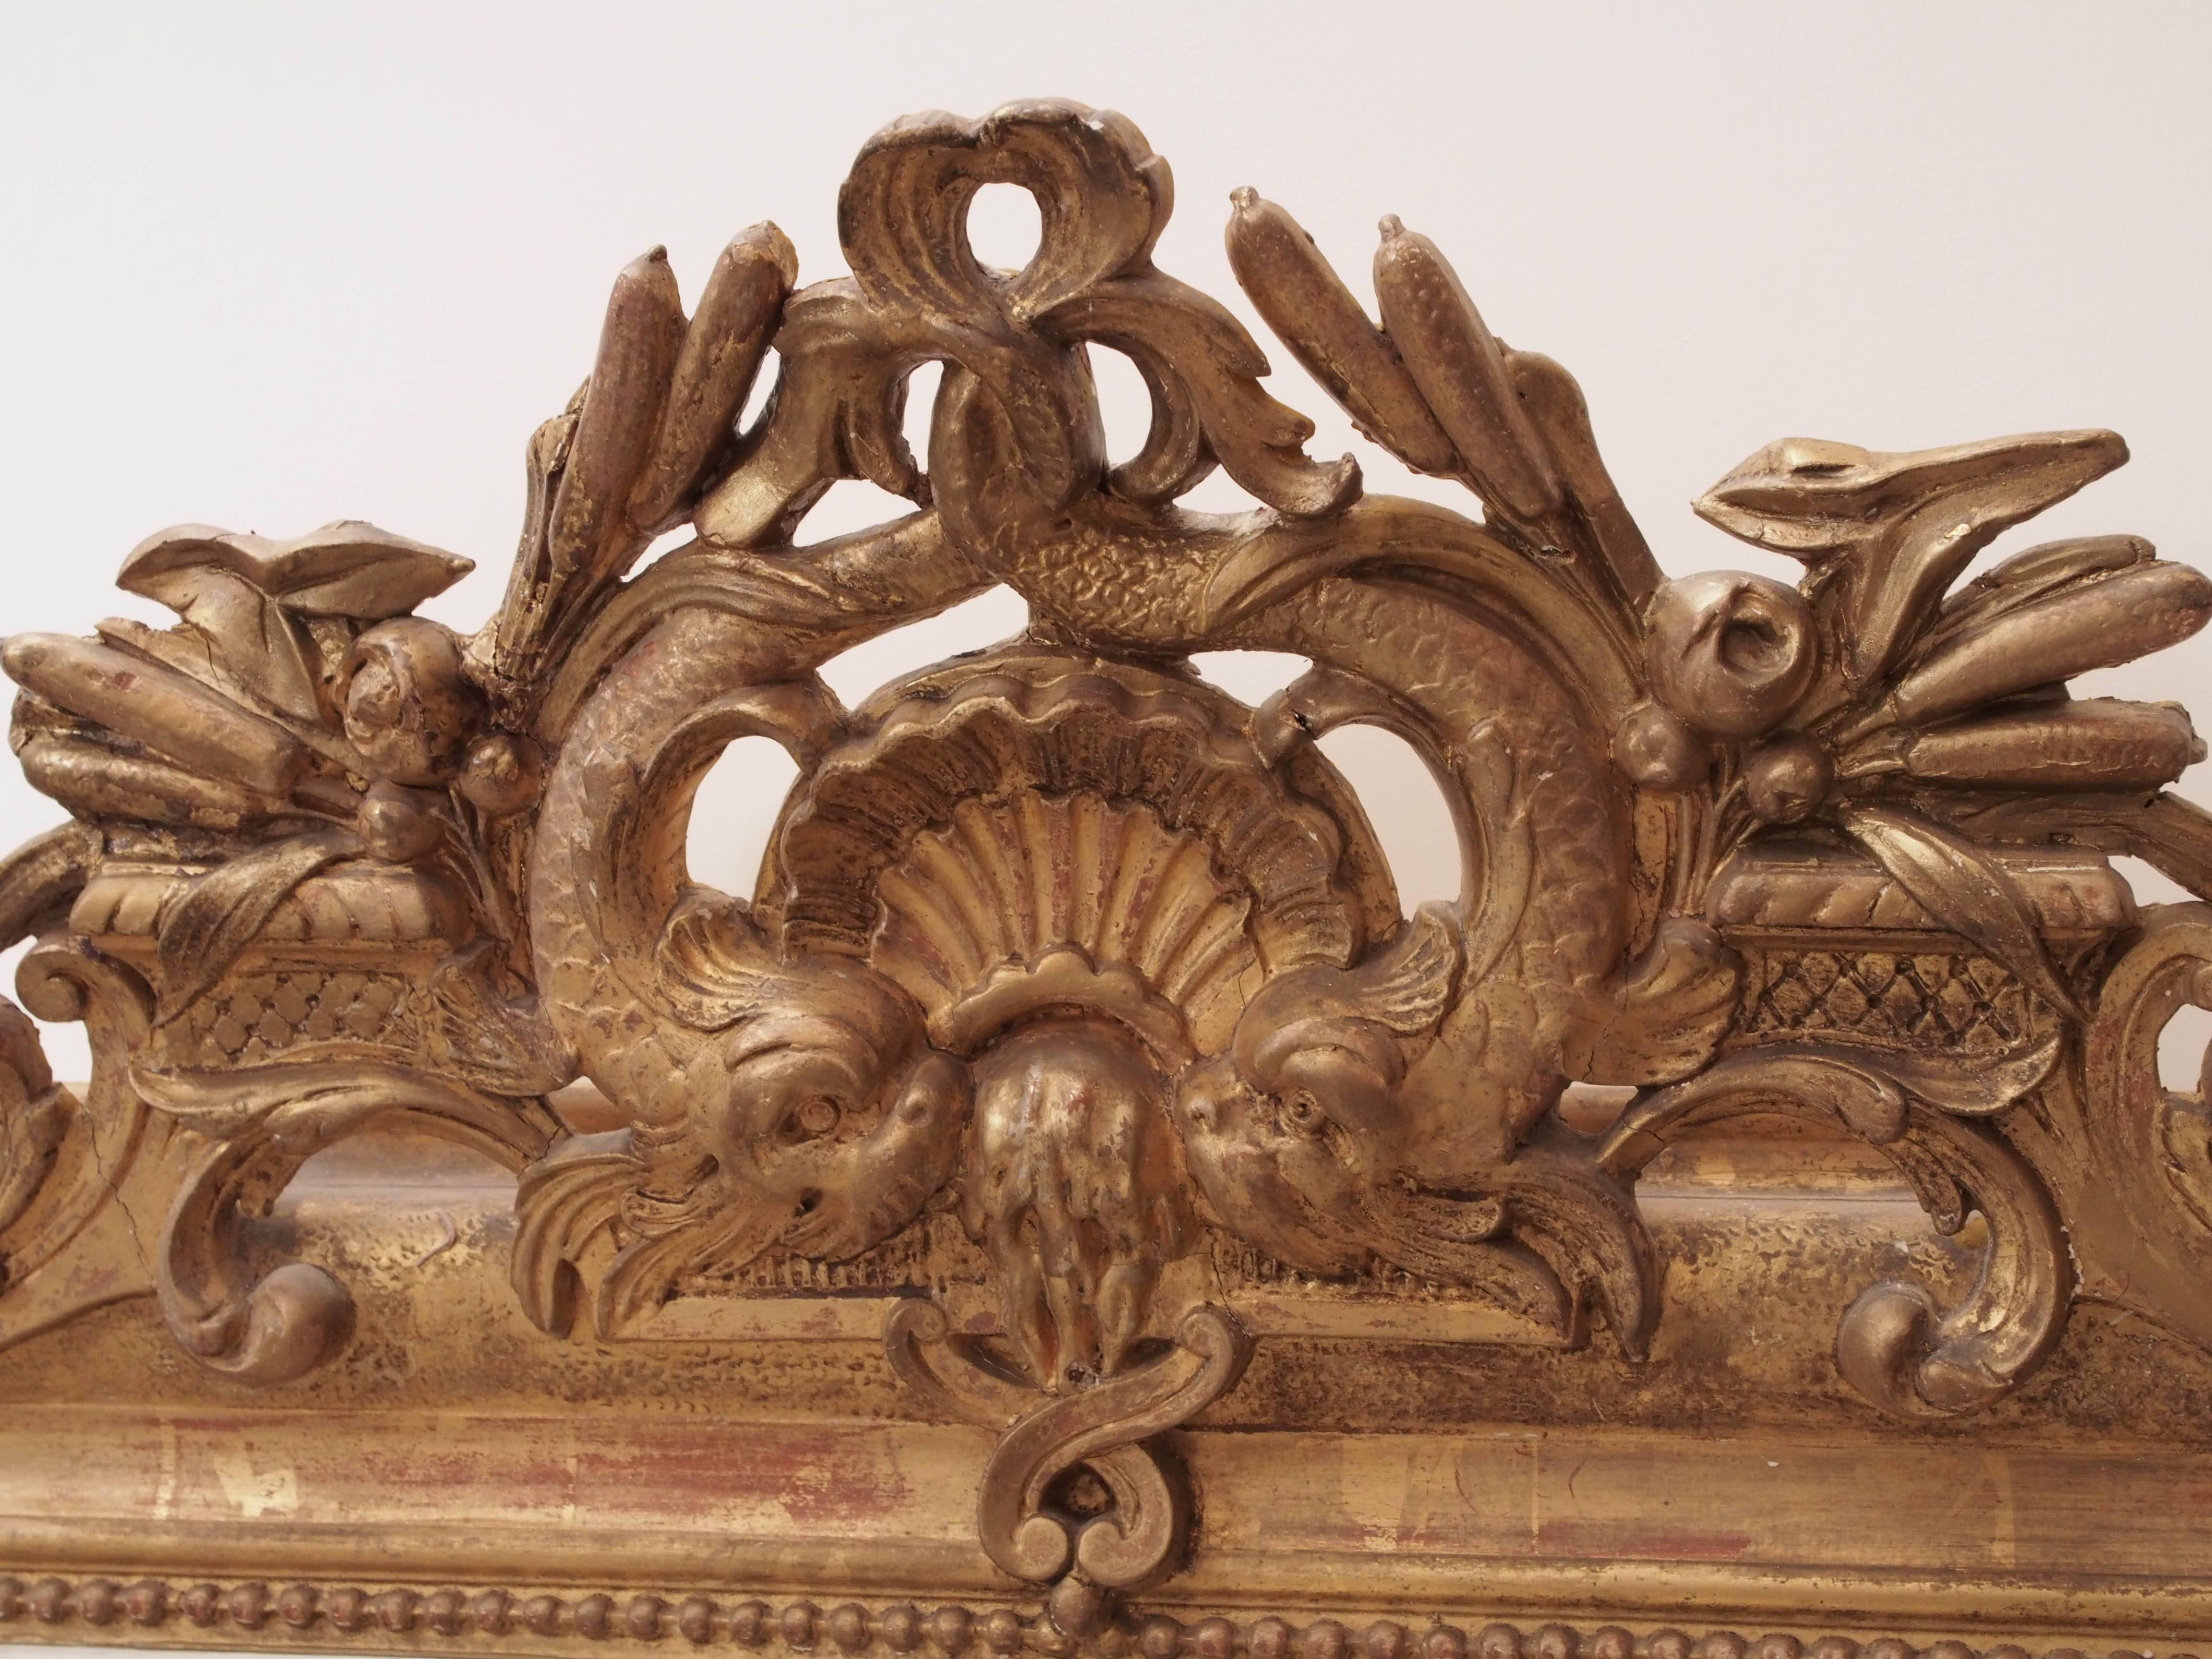 Beautiful 19th Century French Louis XVI Gilt Wood Frame with intricate carvings. The carved crest has detailed koi fish & water plant motifs. These carved details are also found at the bottom corners. The painted gold frame also has hand carved